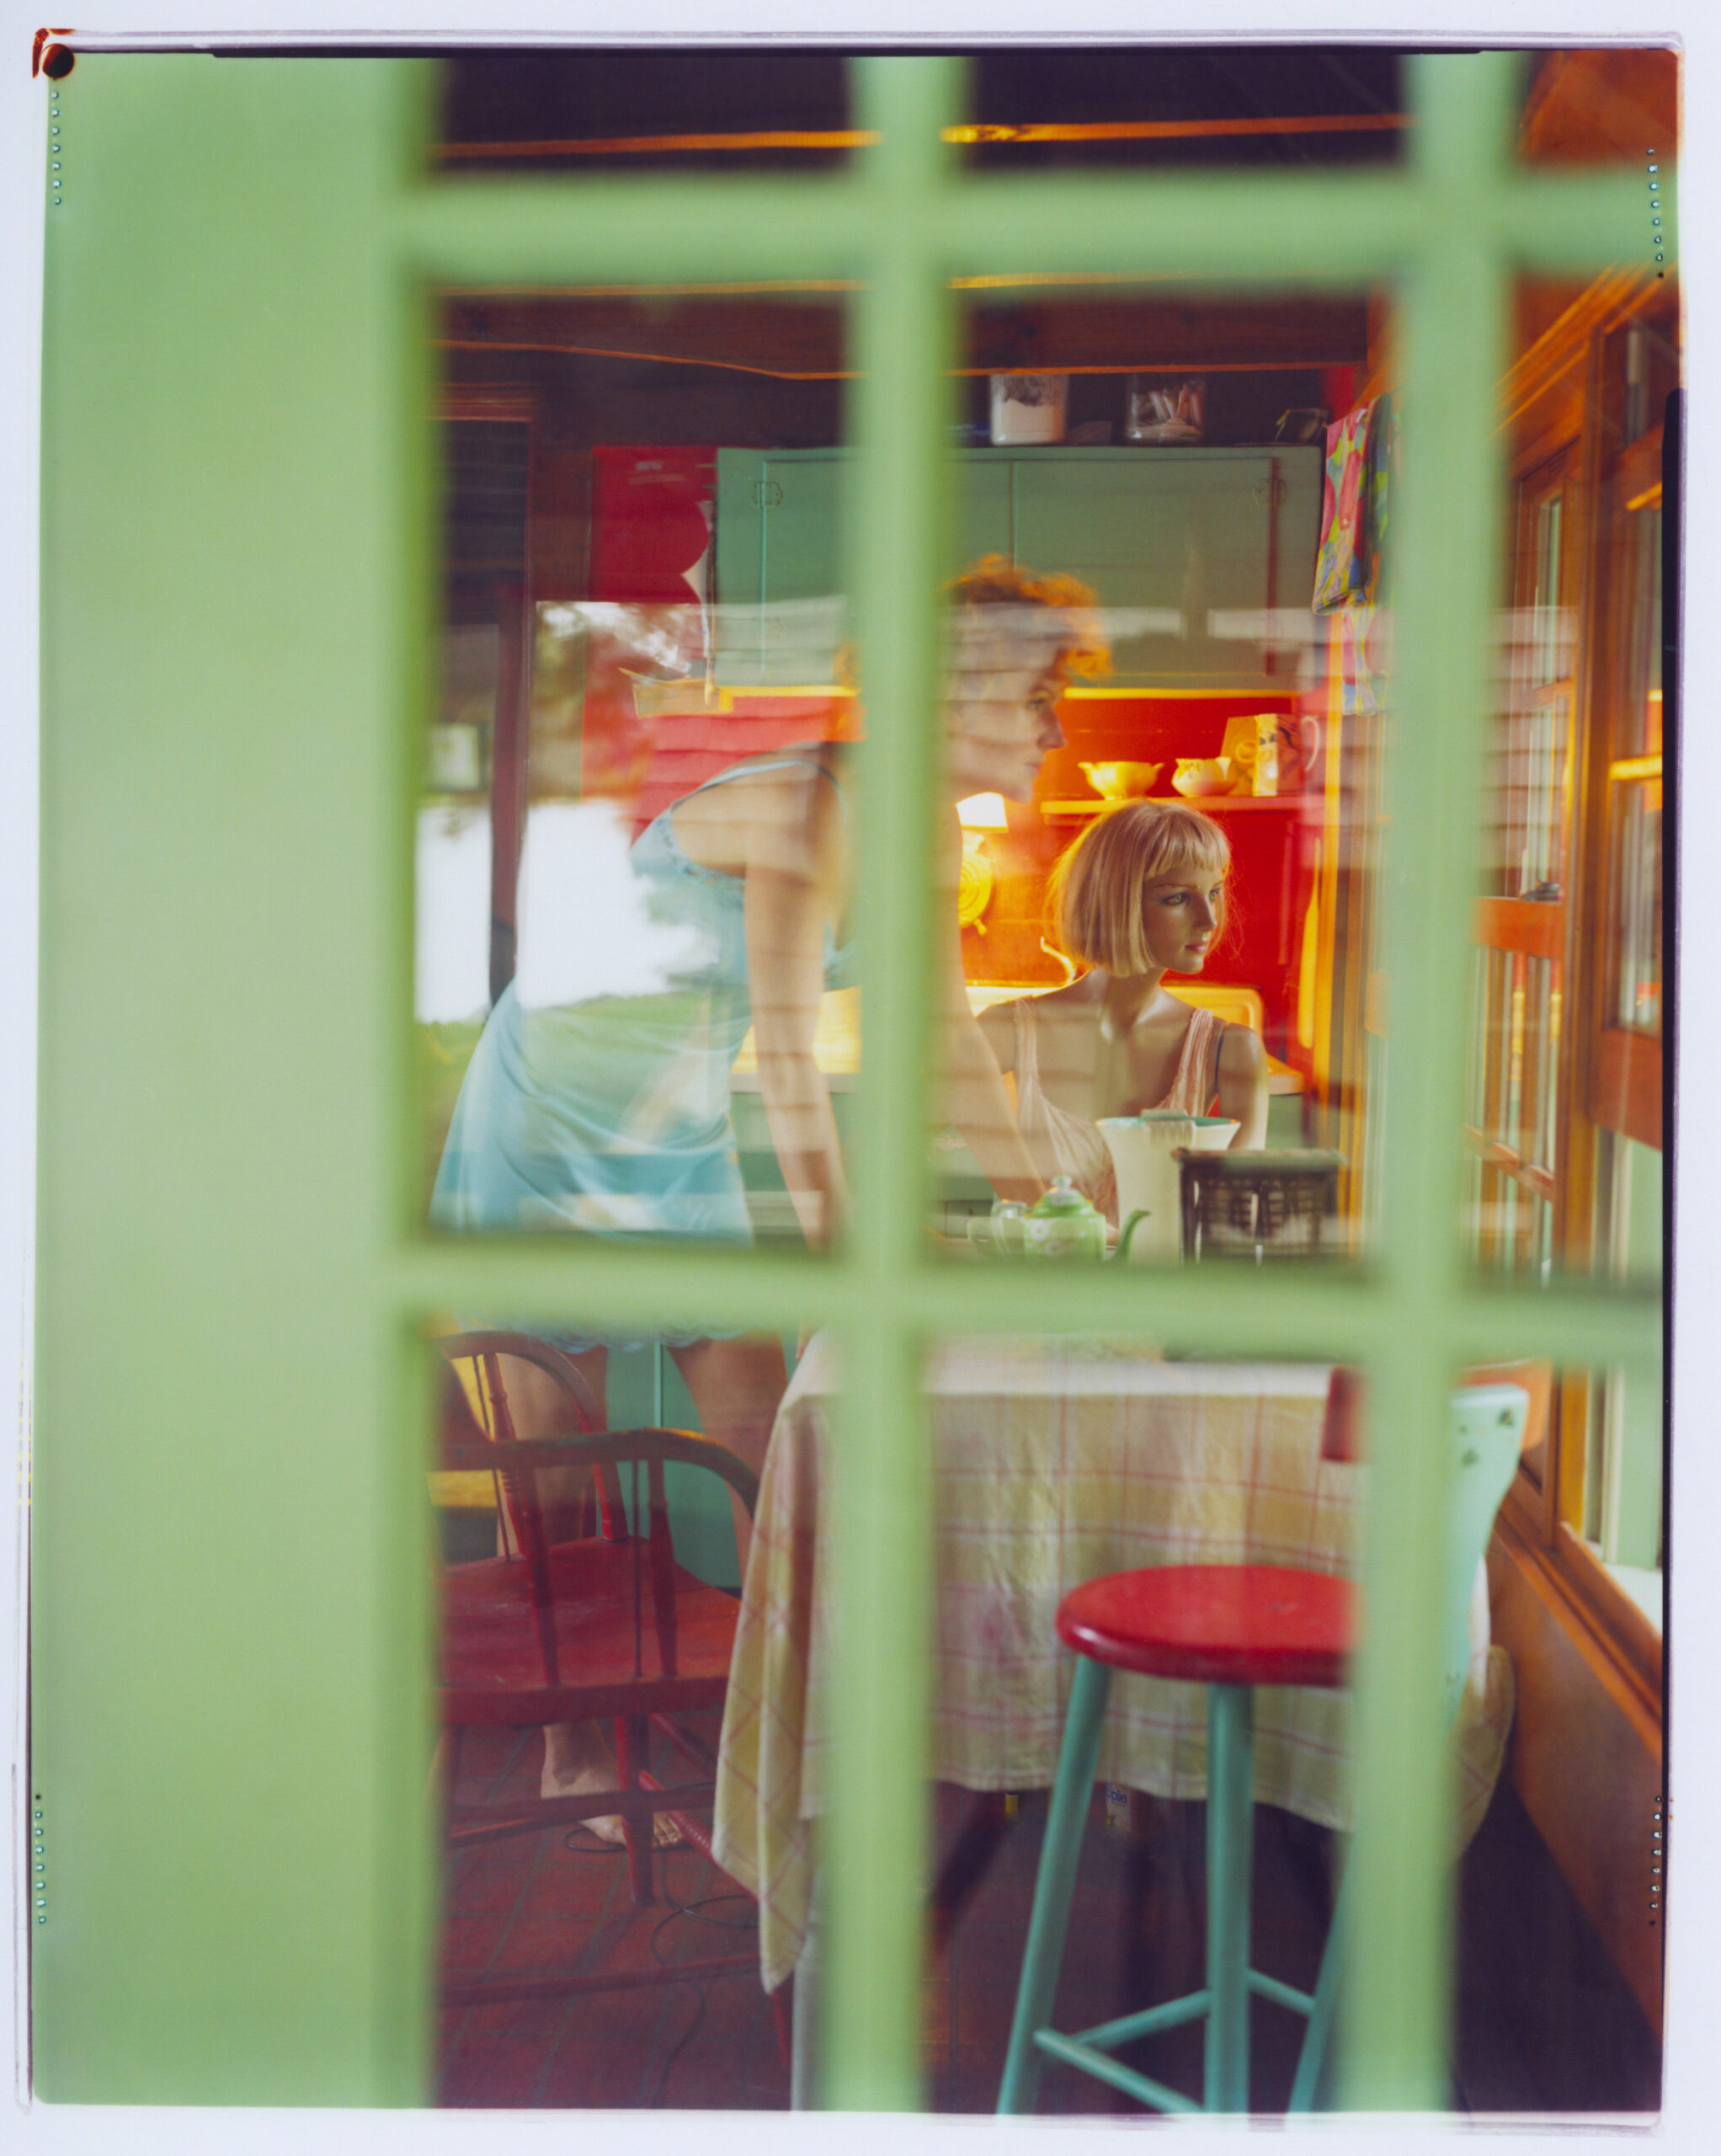 A woman and a mannequin through a green door window in a kitchen.